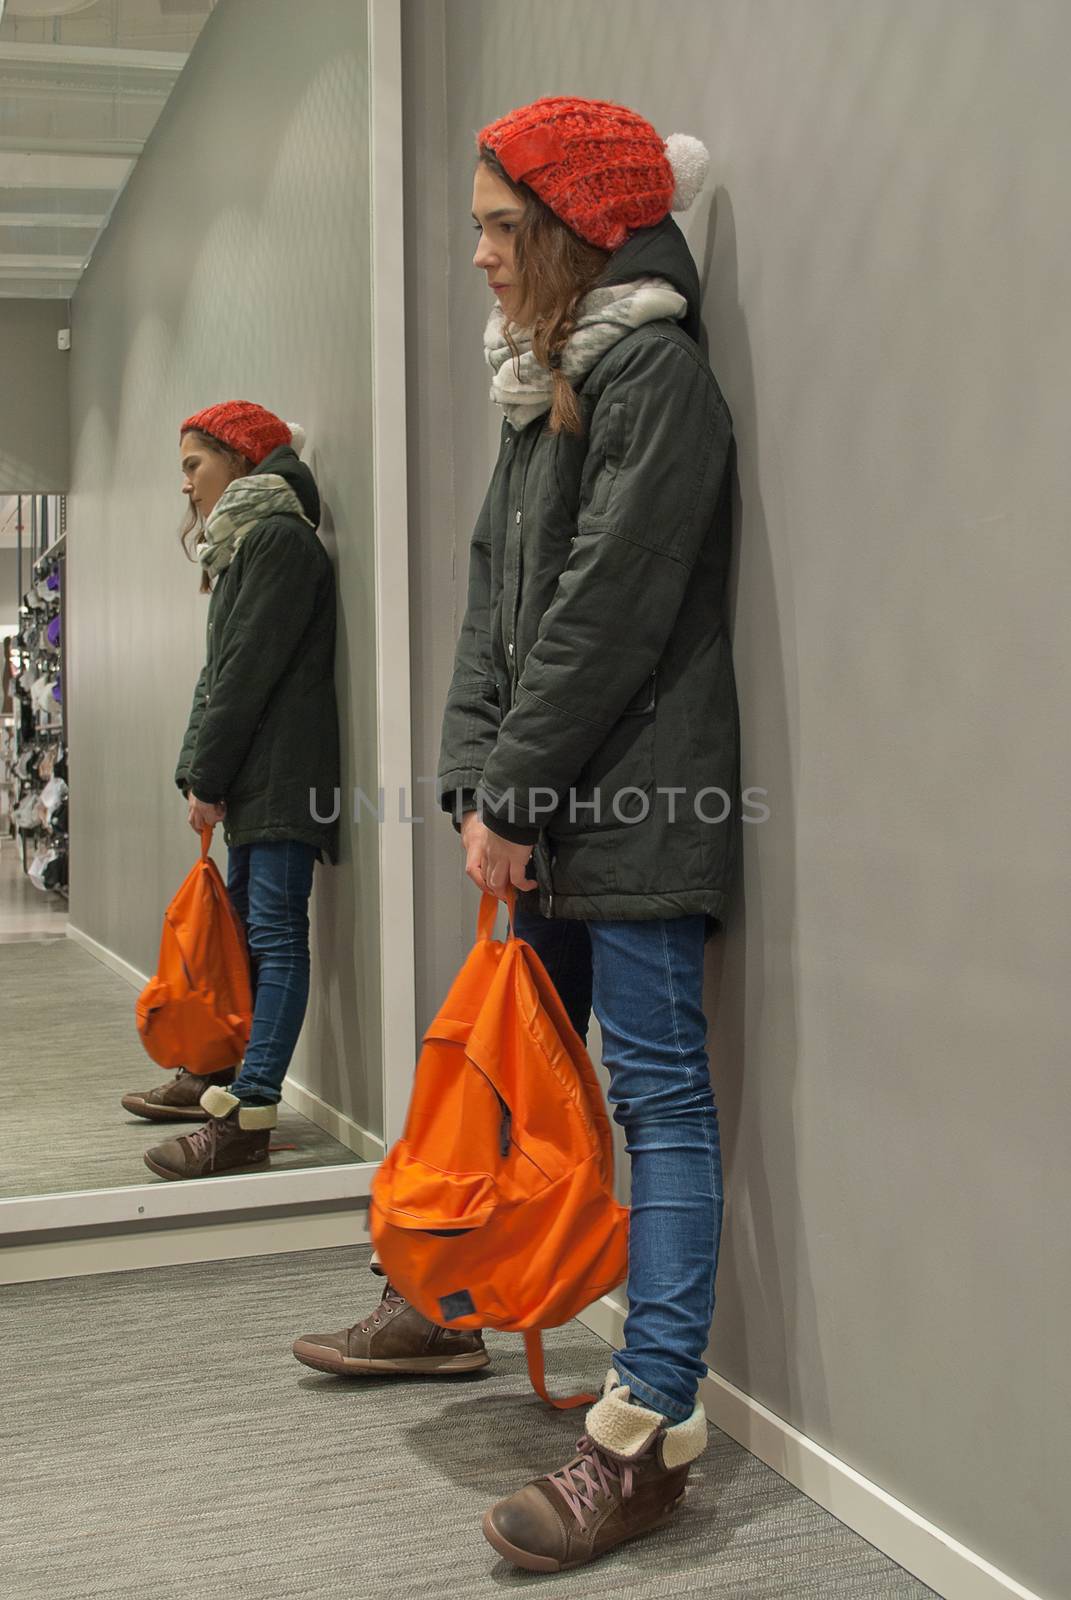 Reflection in the mirror girl in a red cap and orange backpack.